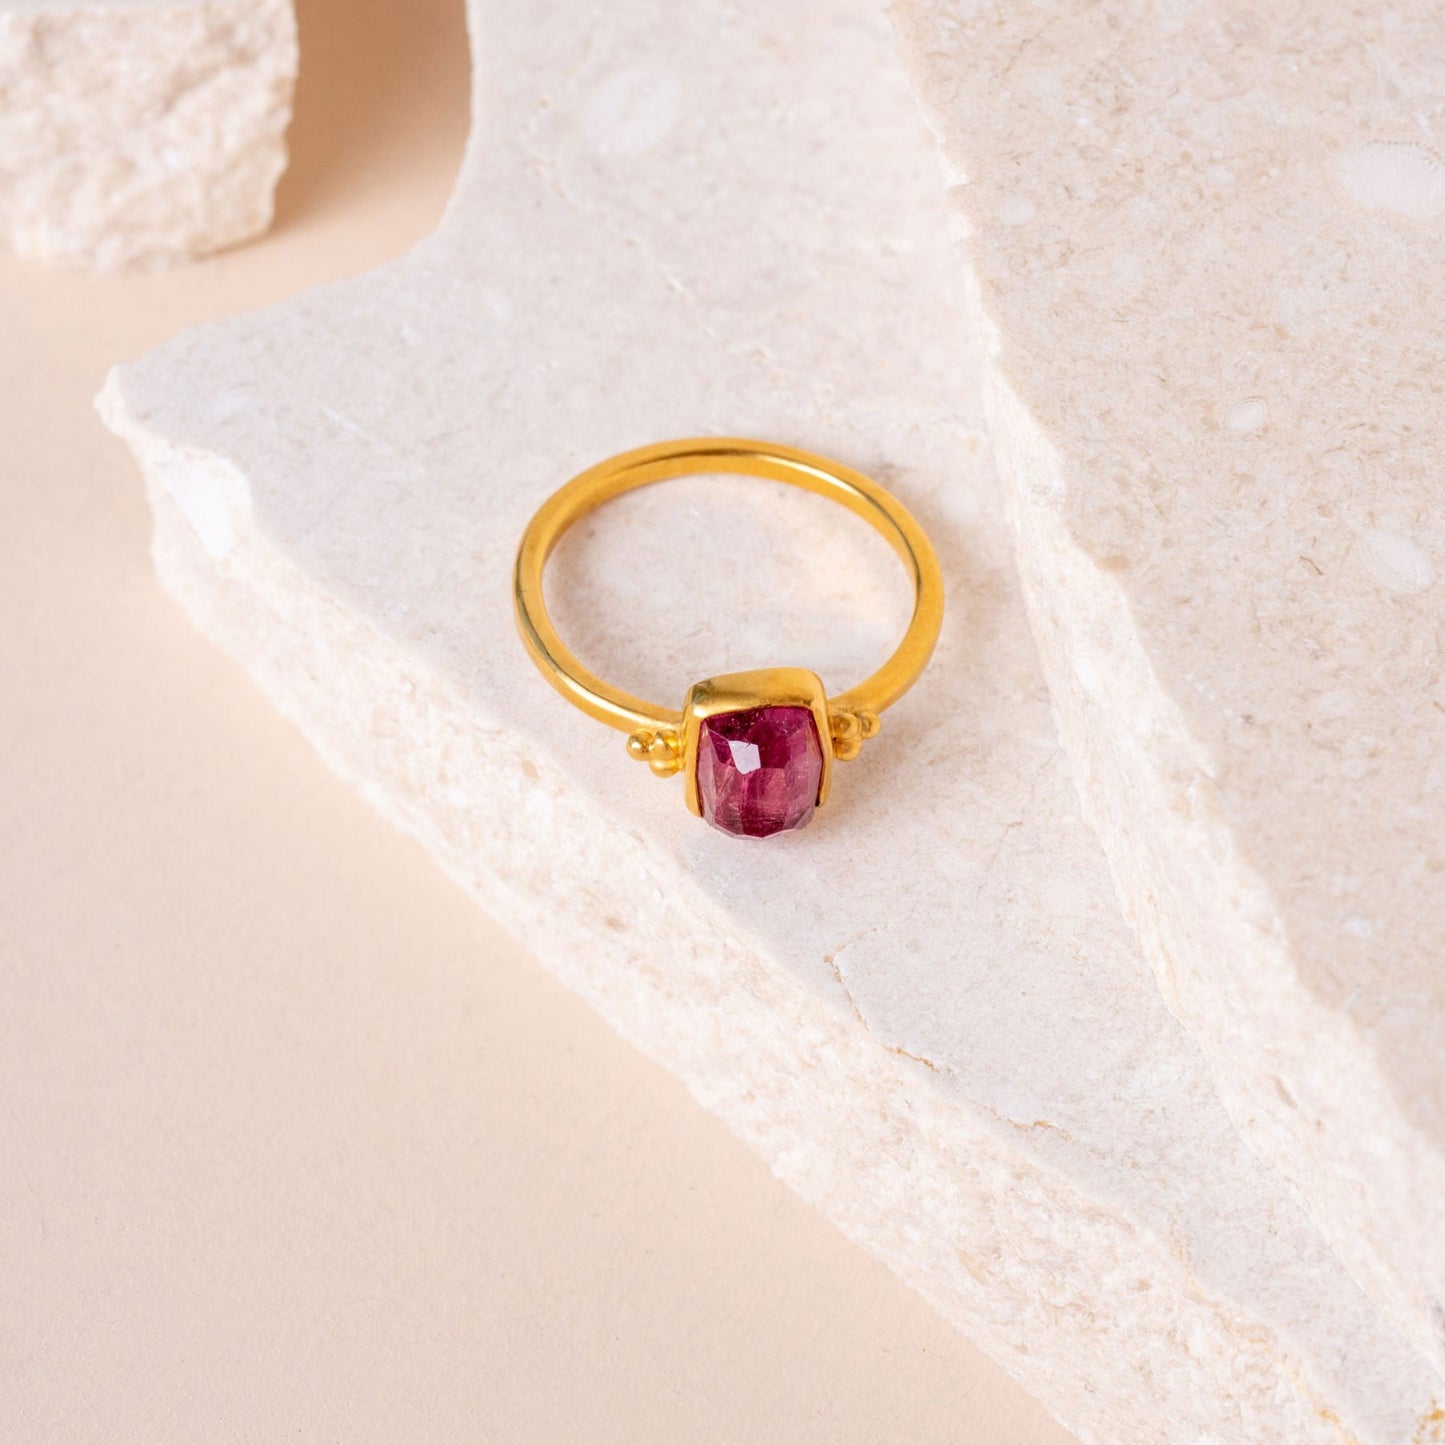 Delicate gold vermeil ring with hand-cut pink tourmaline, accentuated by artisanal granulation details.